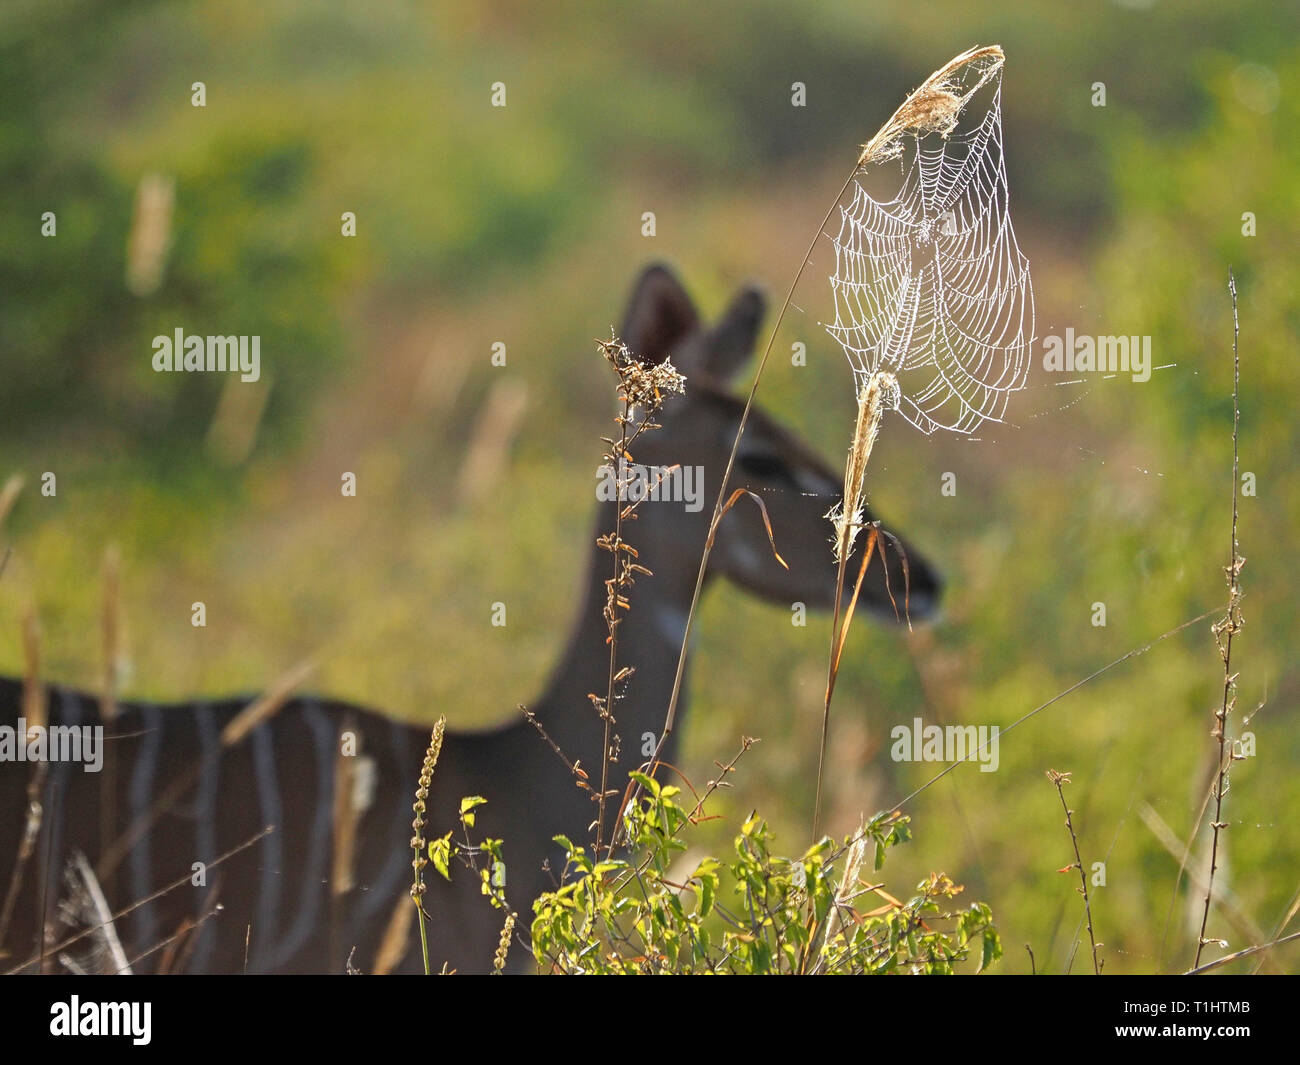 female Lesser Kudu (Tragelaphus imberbis) forms gentle backdrop to silvery spider's web glistening with morning dew in Ngulia Hills   Kenya, Africa Stock Photo